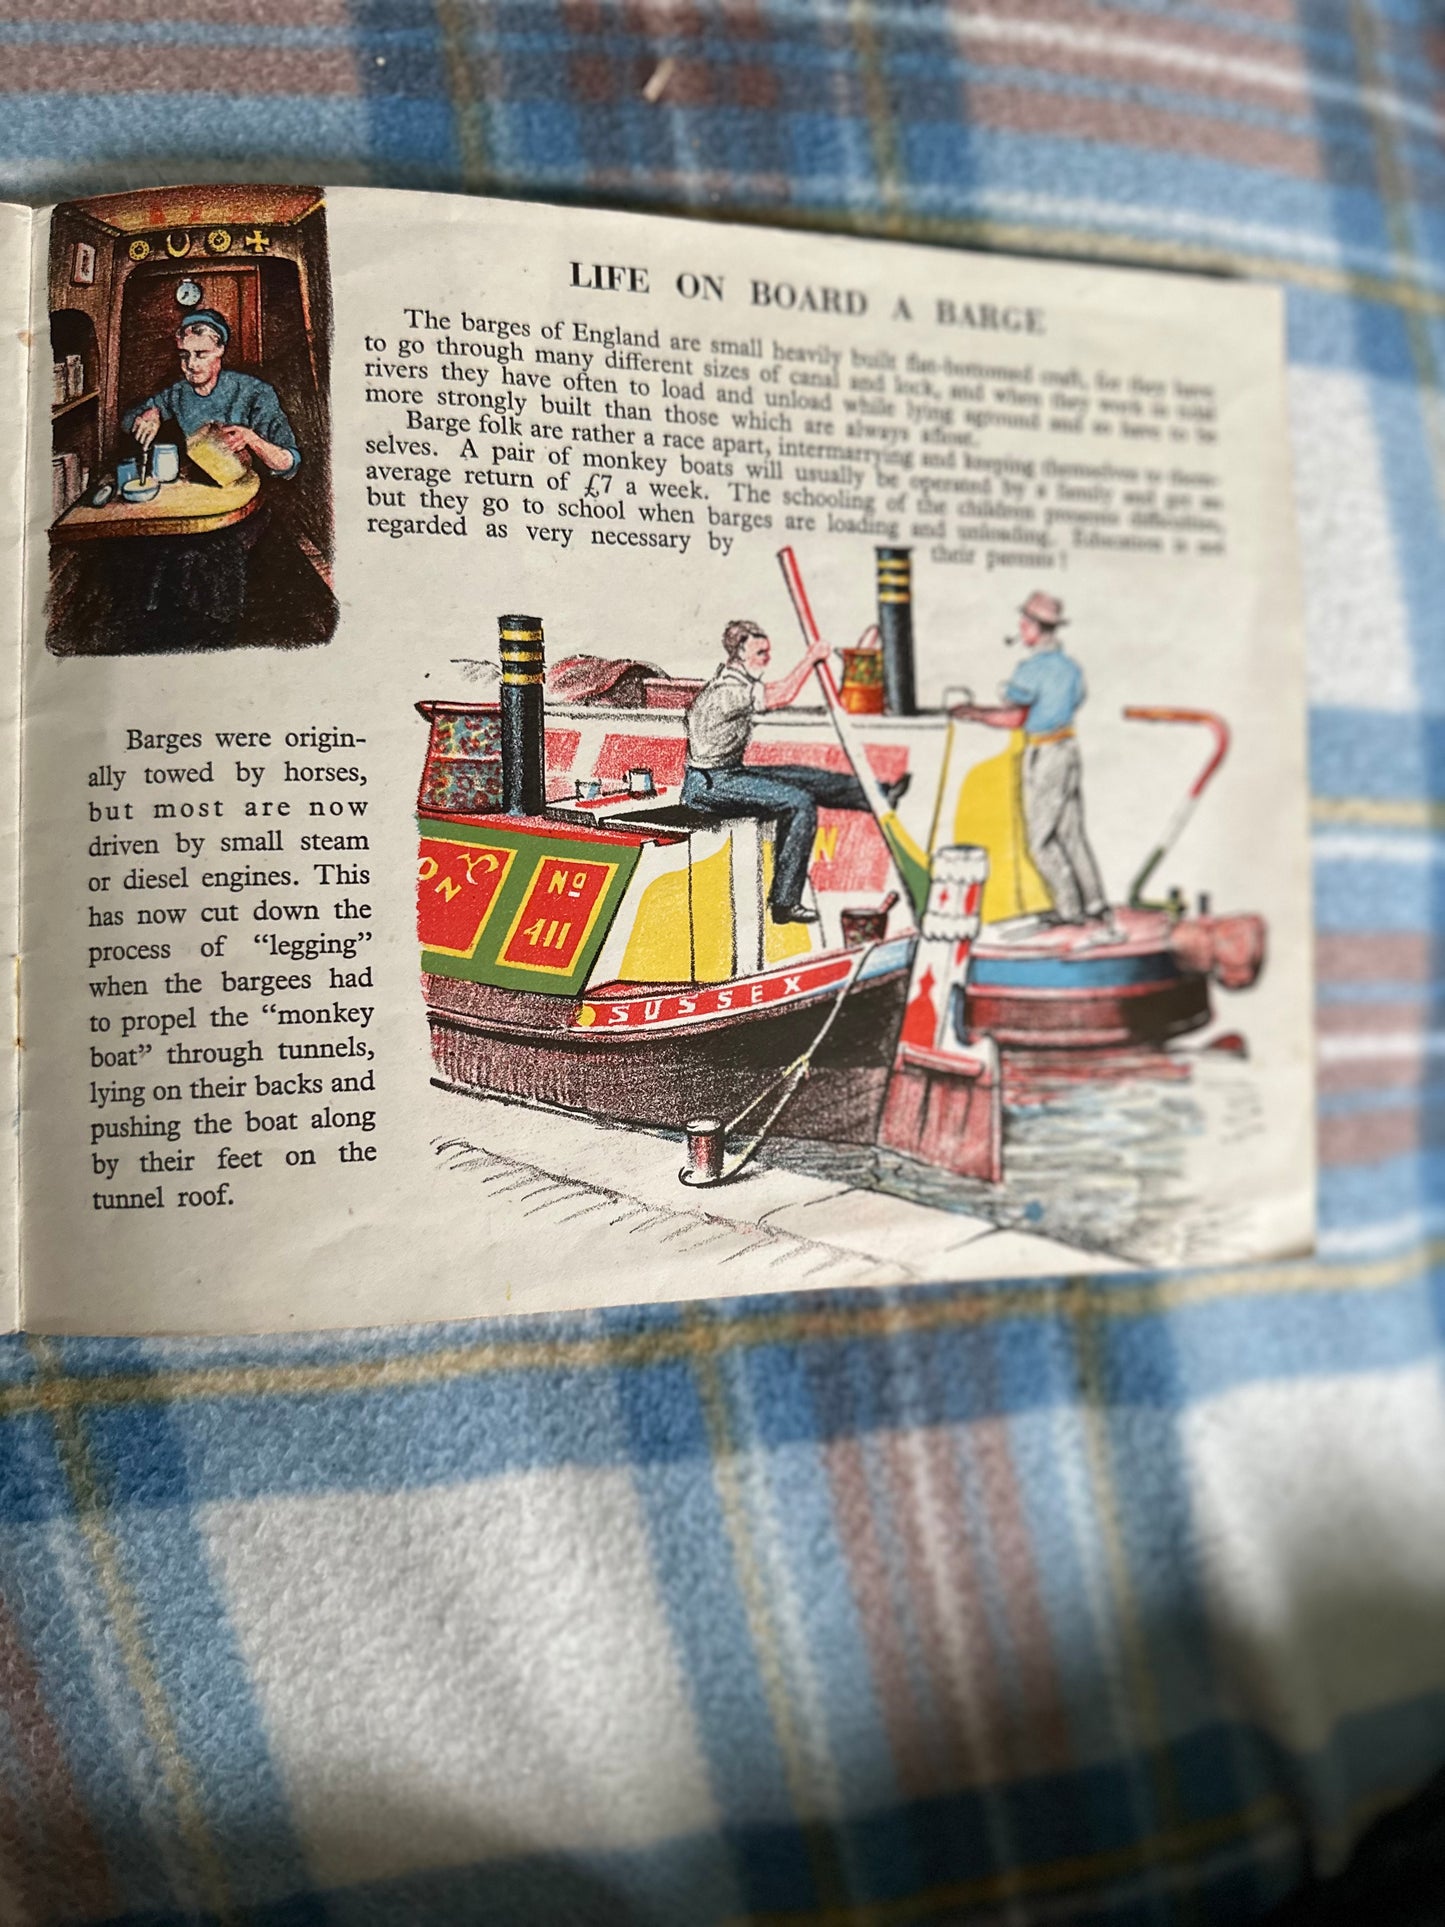 1944 Waterways Of The World(Puffin Picture Book 32)W. J. Bassett-Lowke & Laurence Dunn illustrated